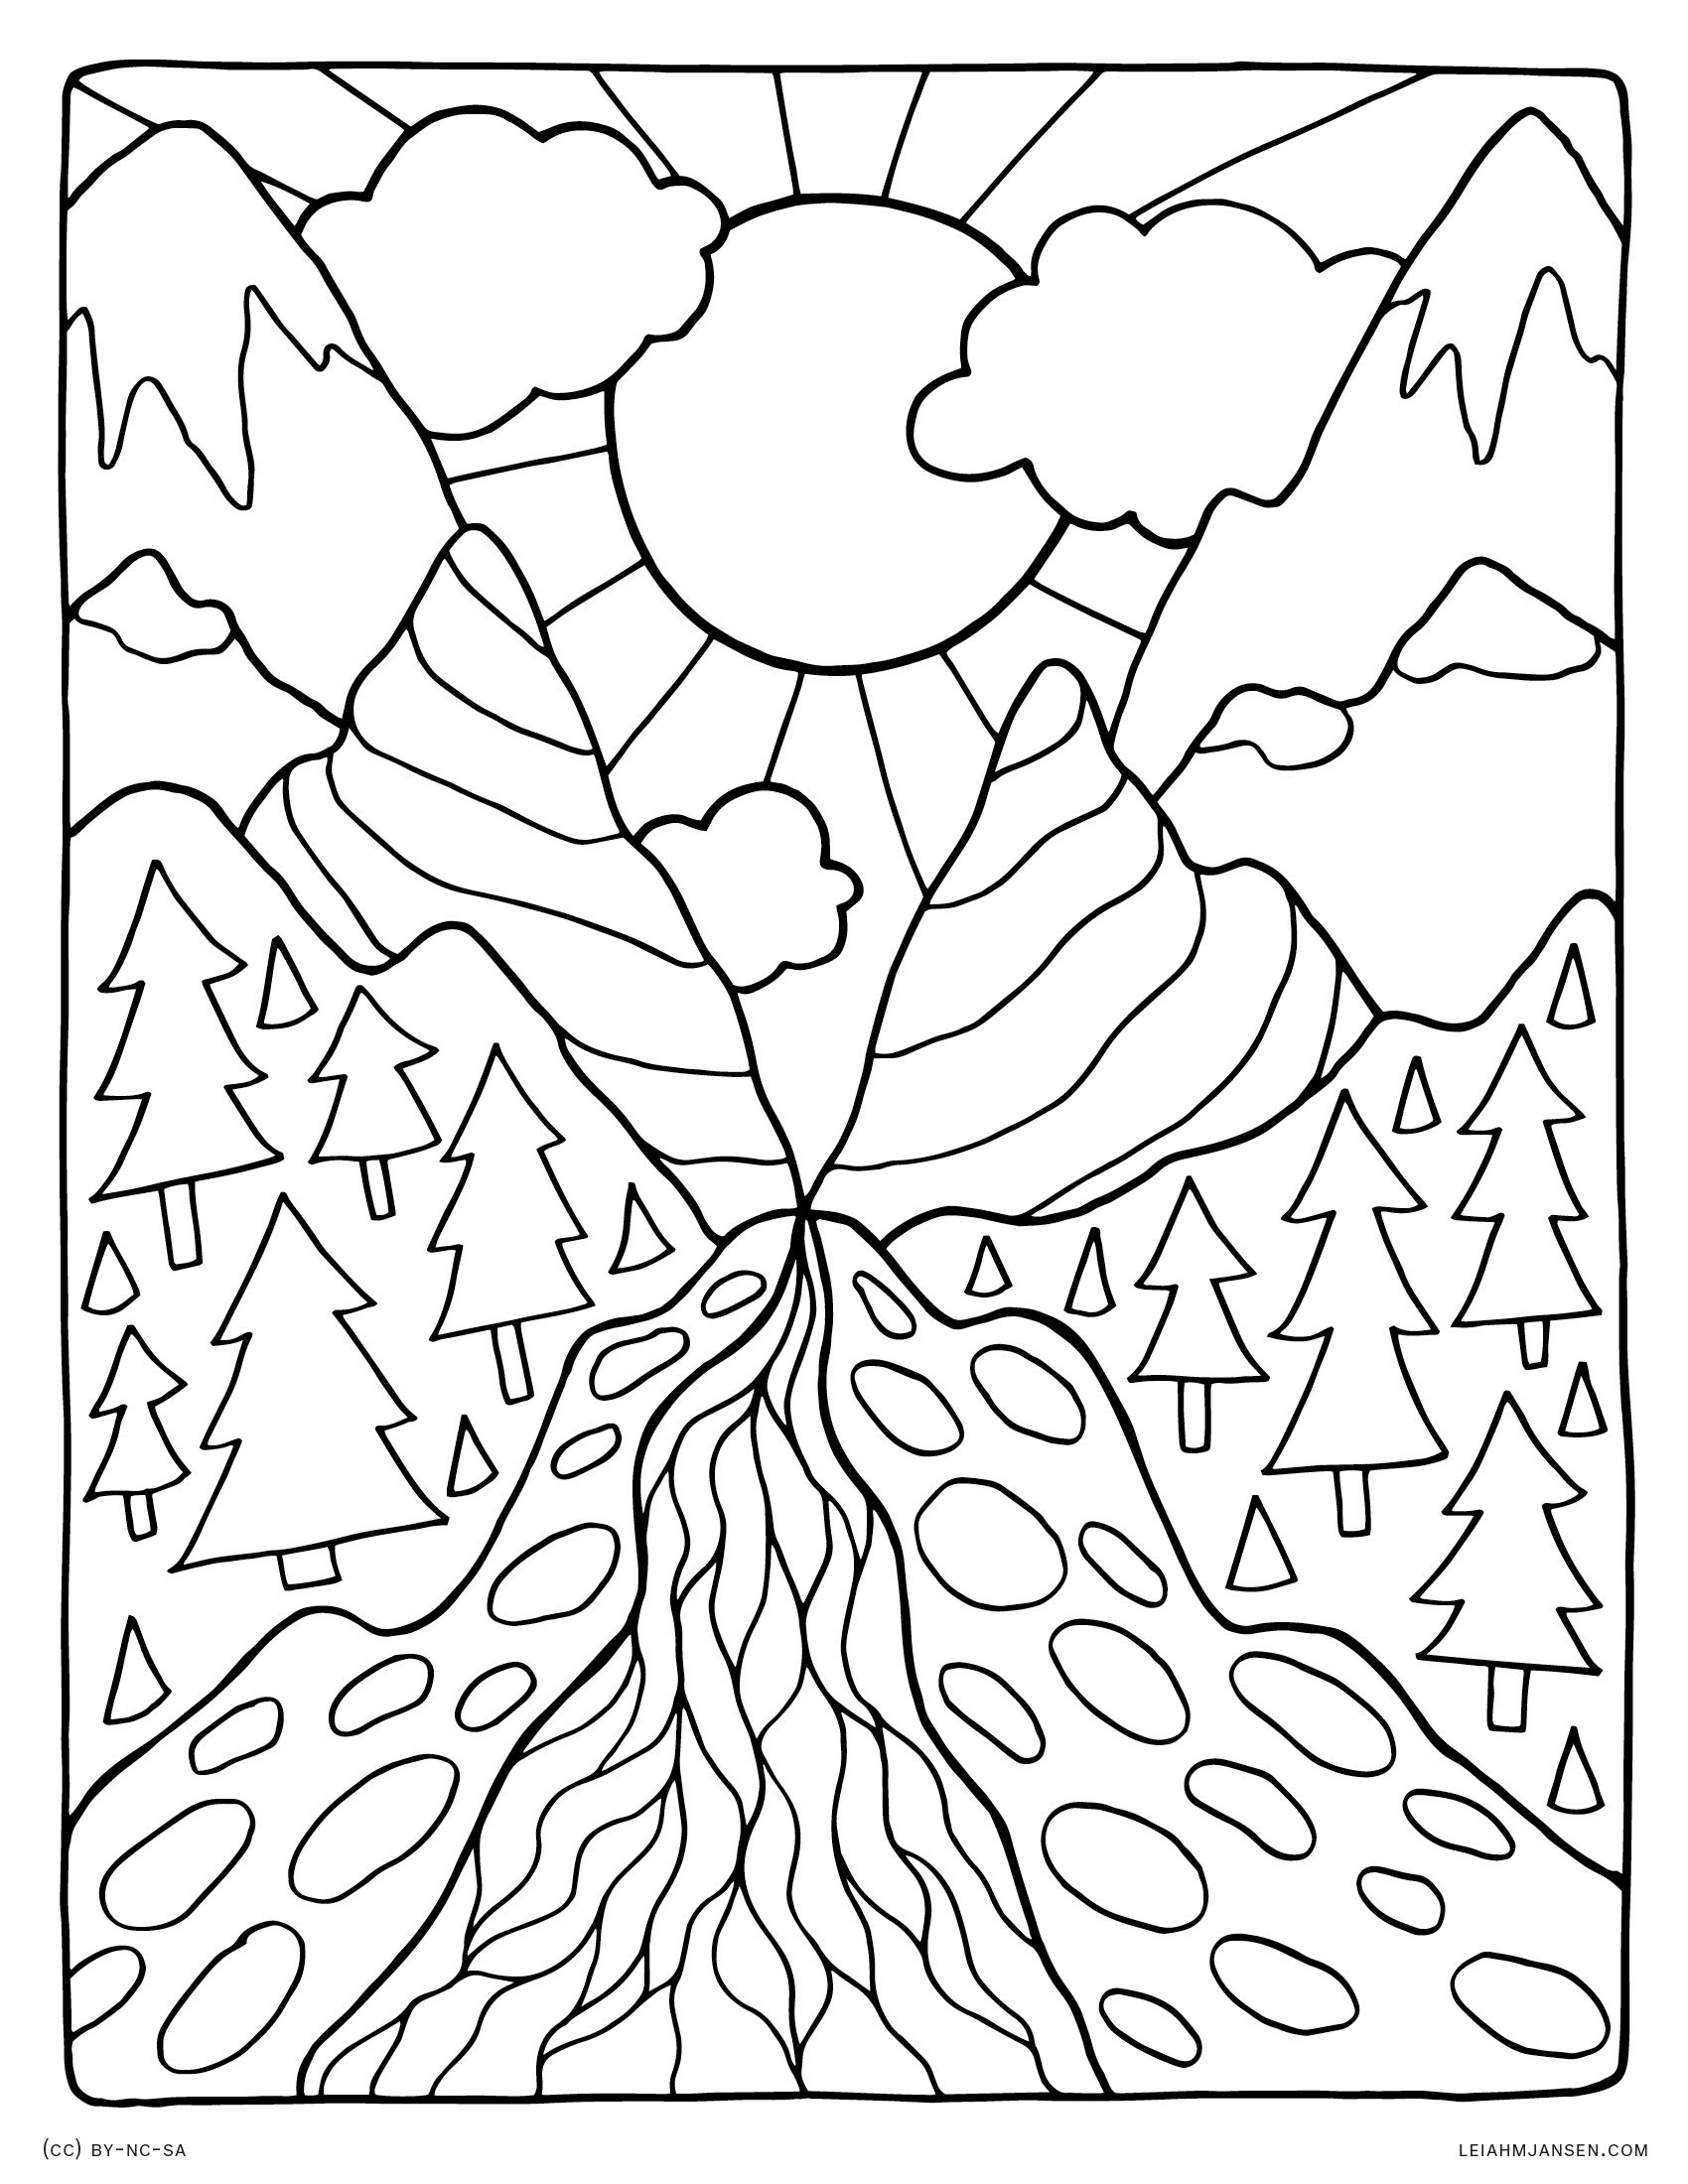 Save The Earth Coloring Pages The Best Earth Day Coloring Pages